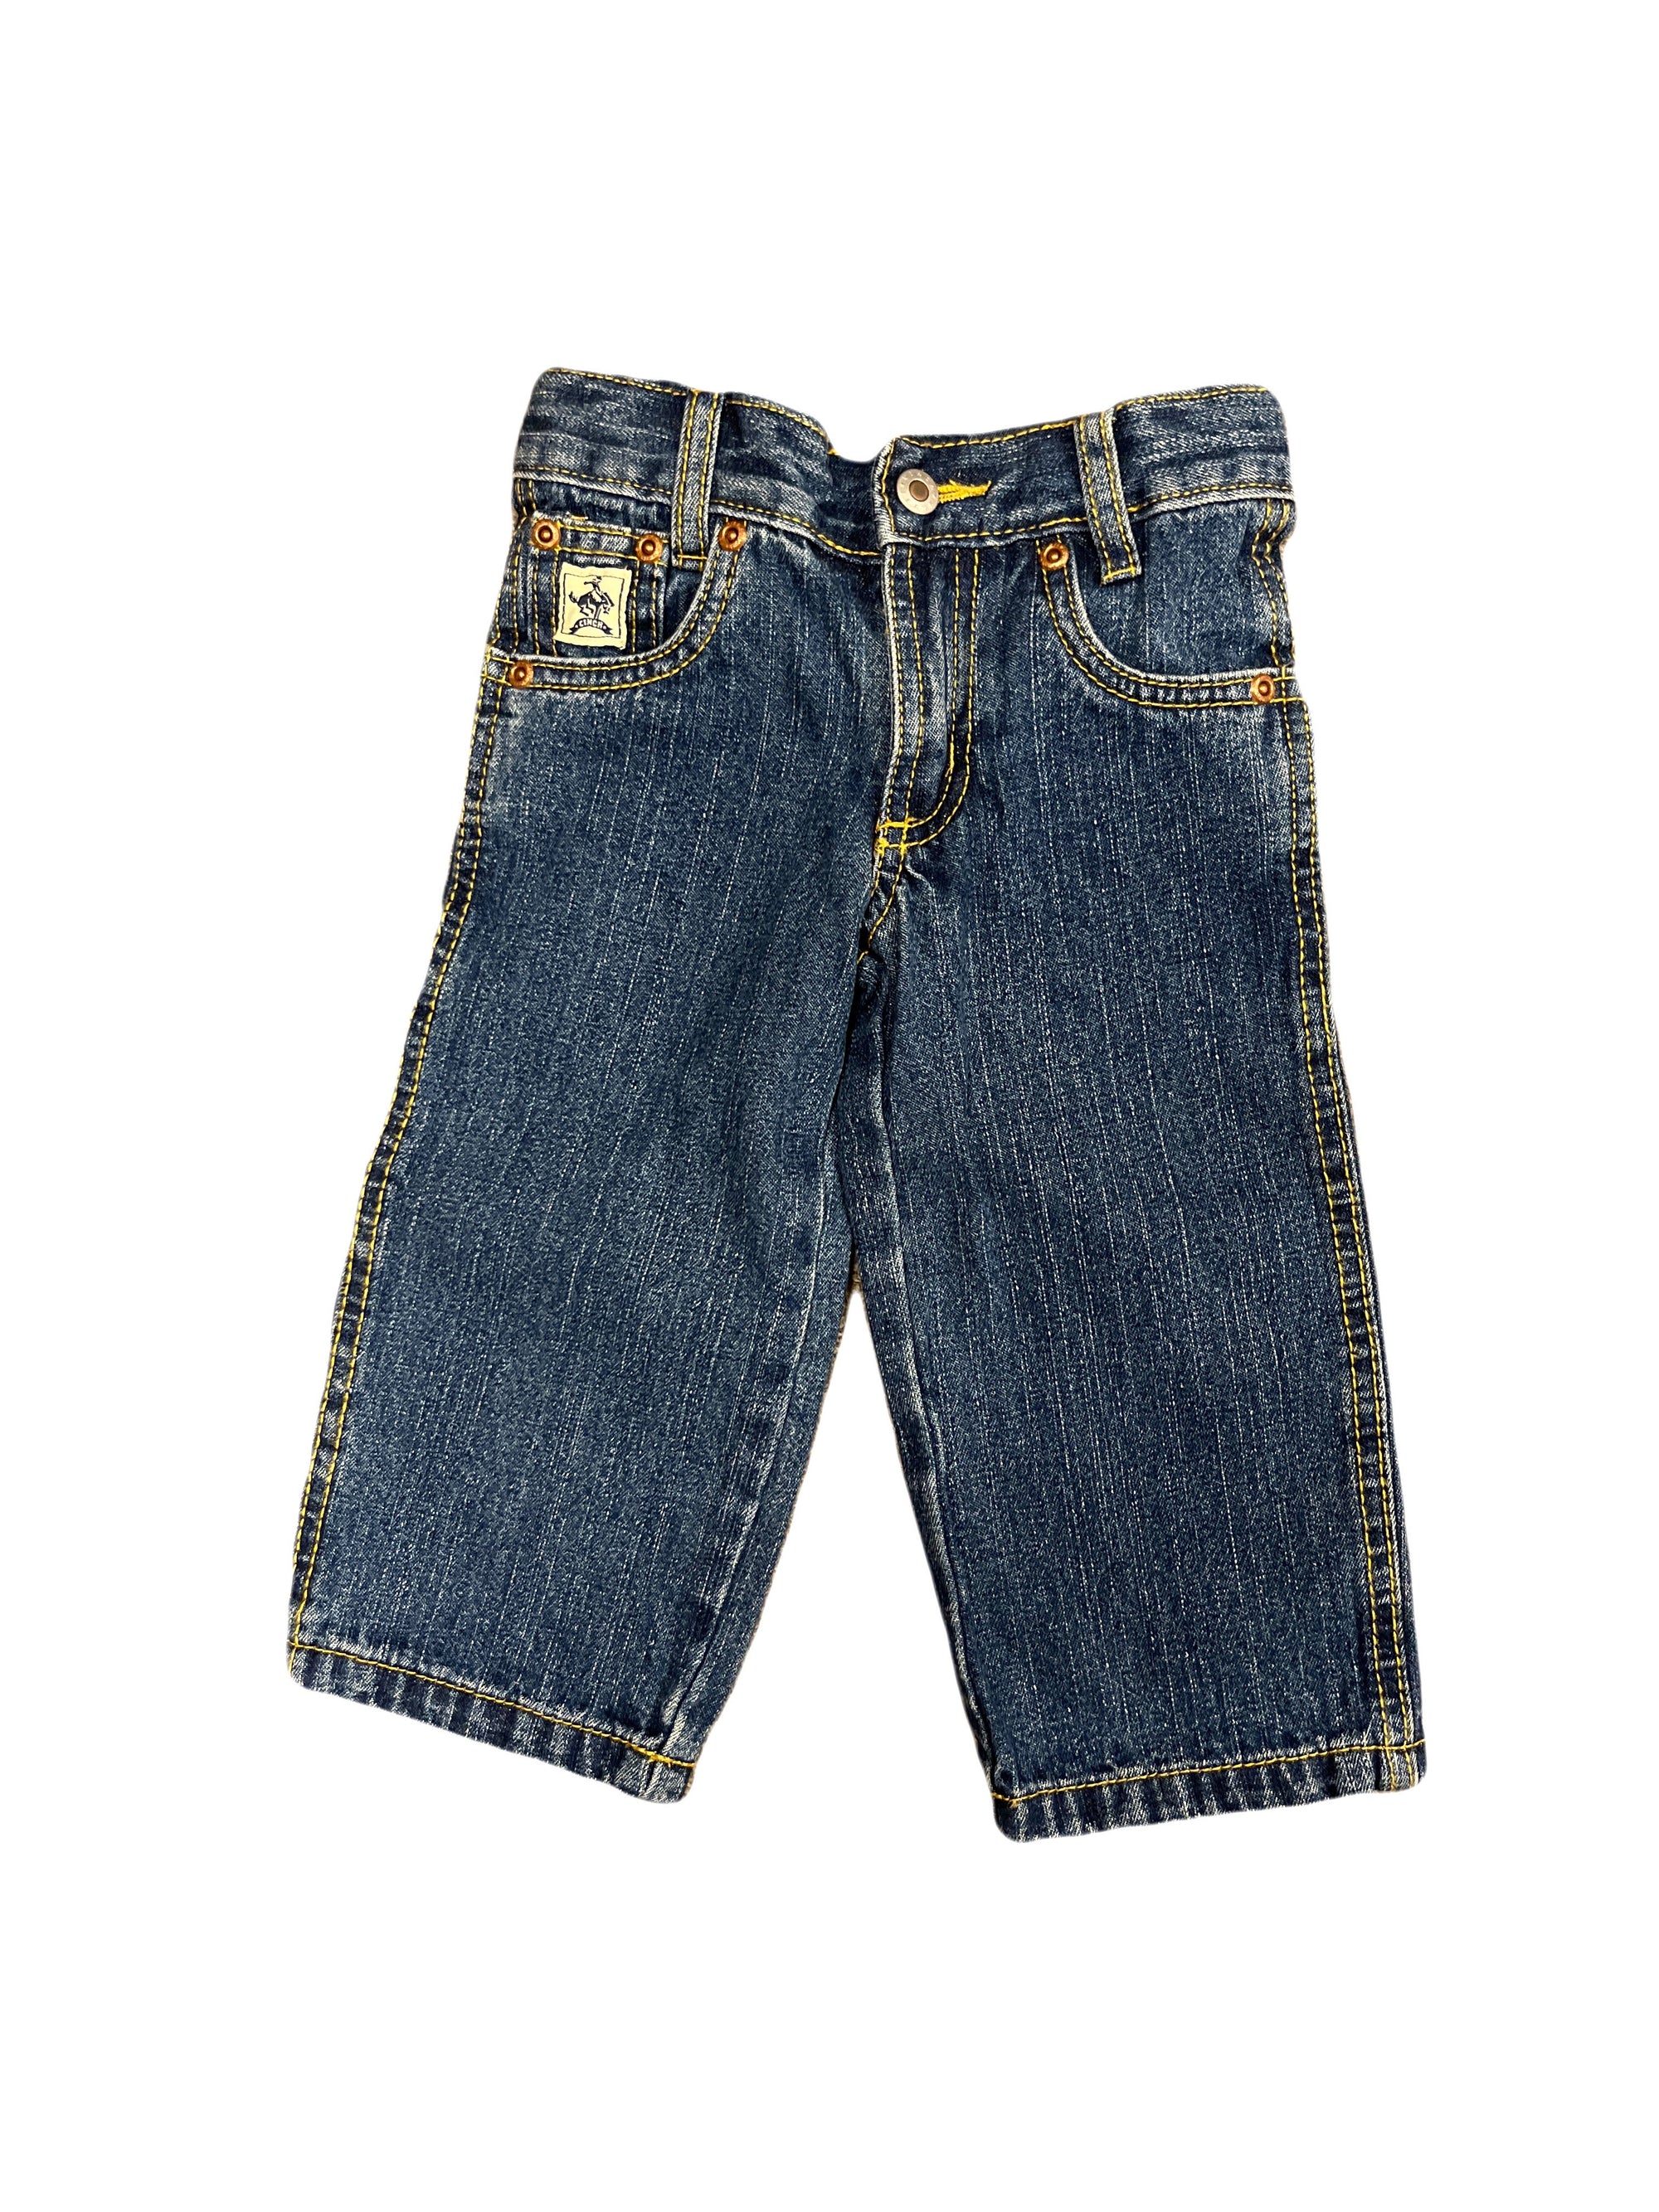 Cinch Infant/Toddler Boy's Jeans STYLE MB10020001